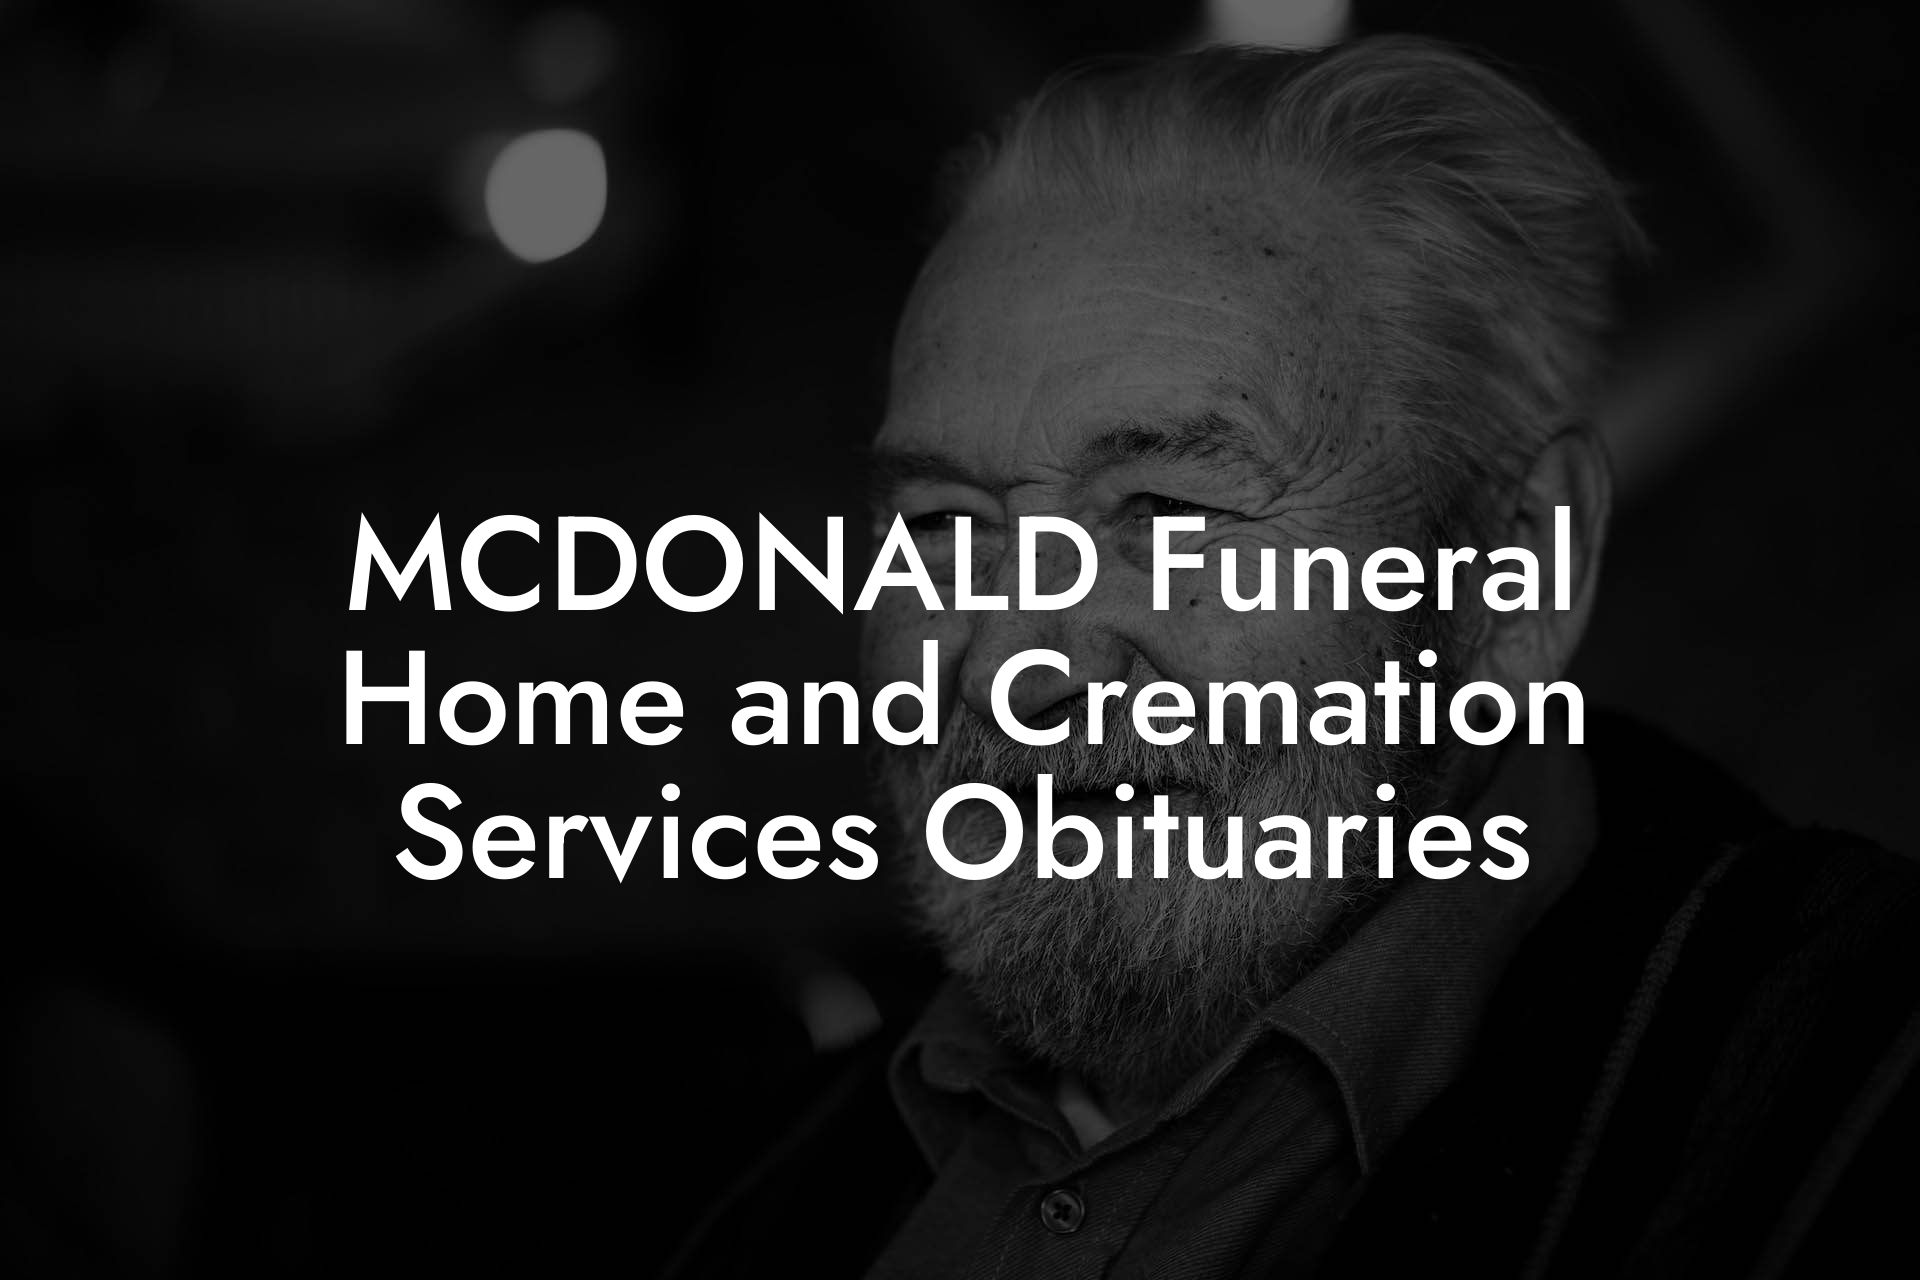 MCDONALD Funeral Home and Cremation Services Obituaries